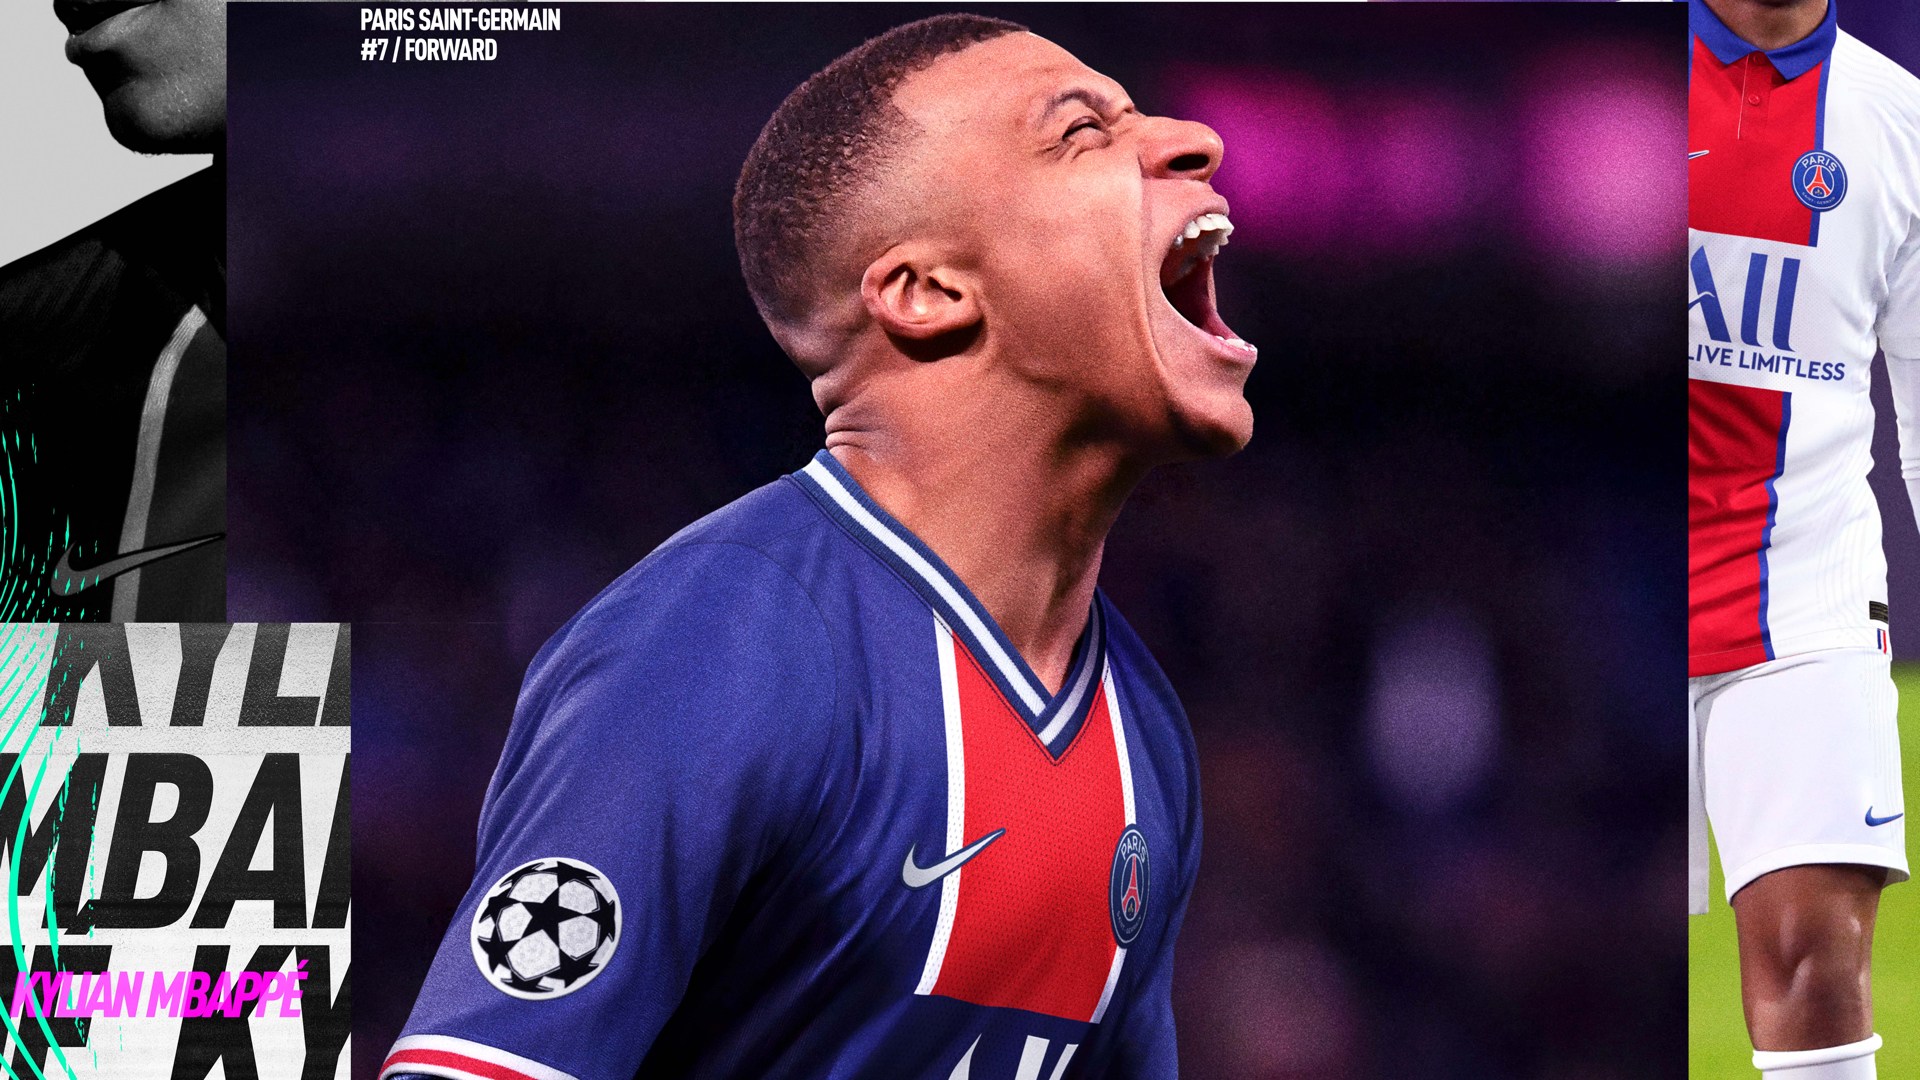 Fifa 21 Gets Official Reveal Trailer Kylian Mbappe Is Cover Athlete